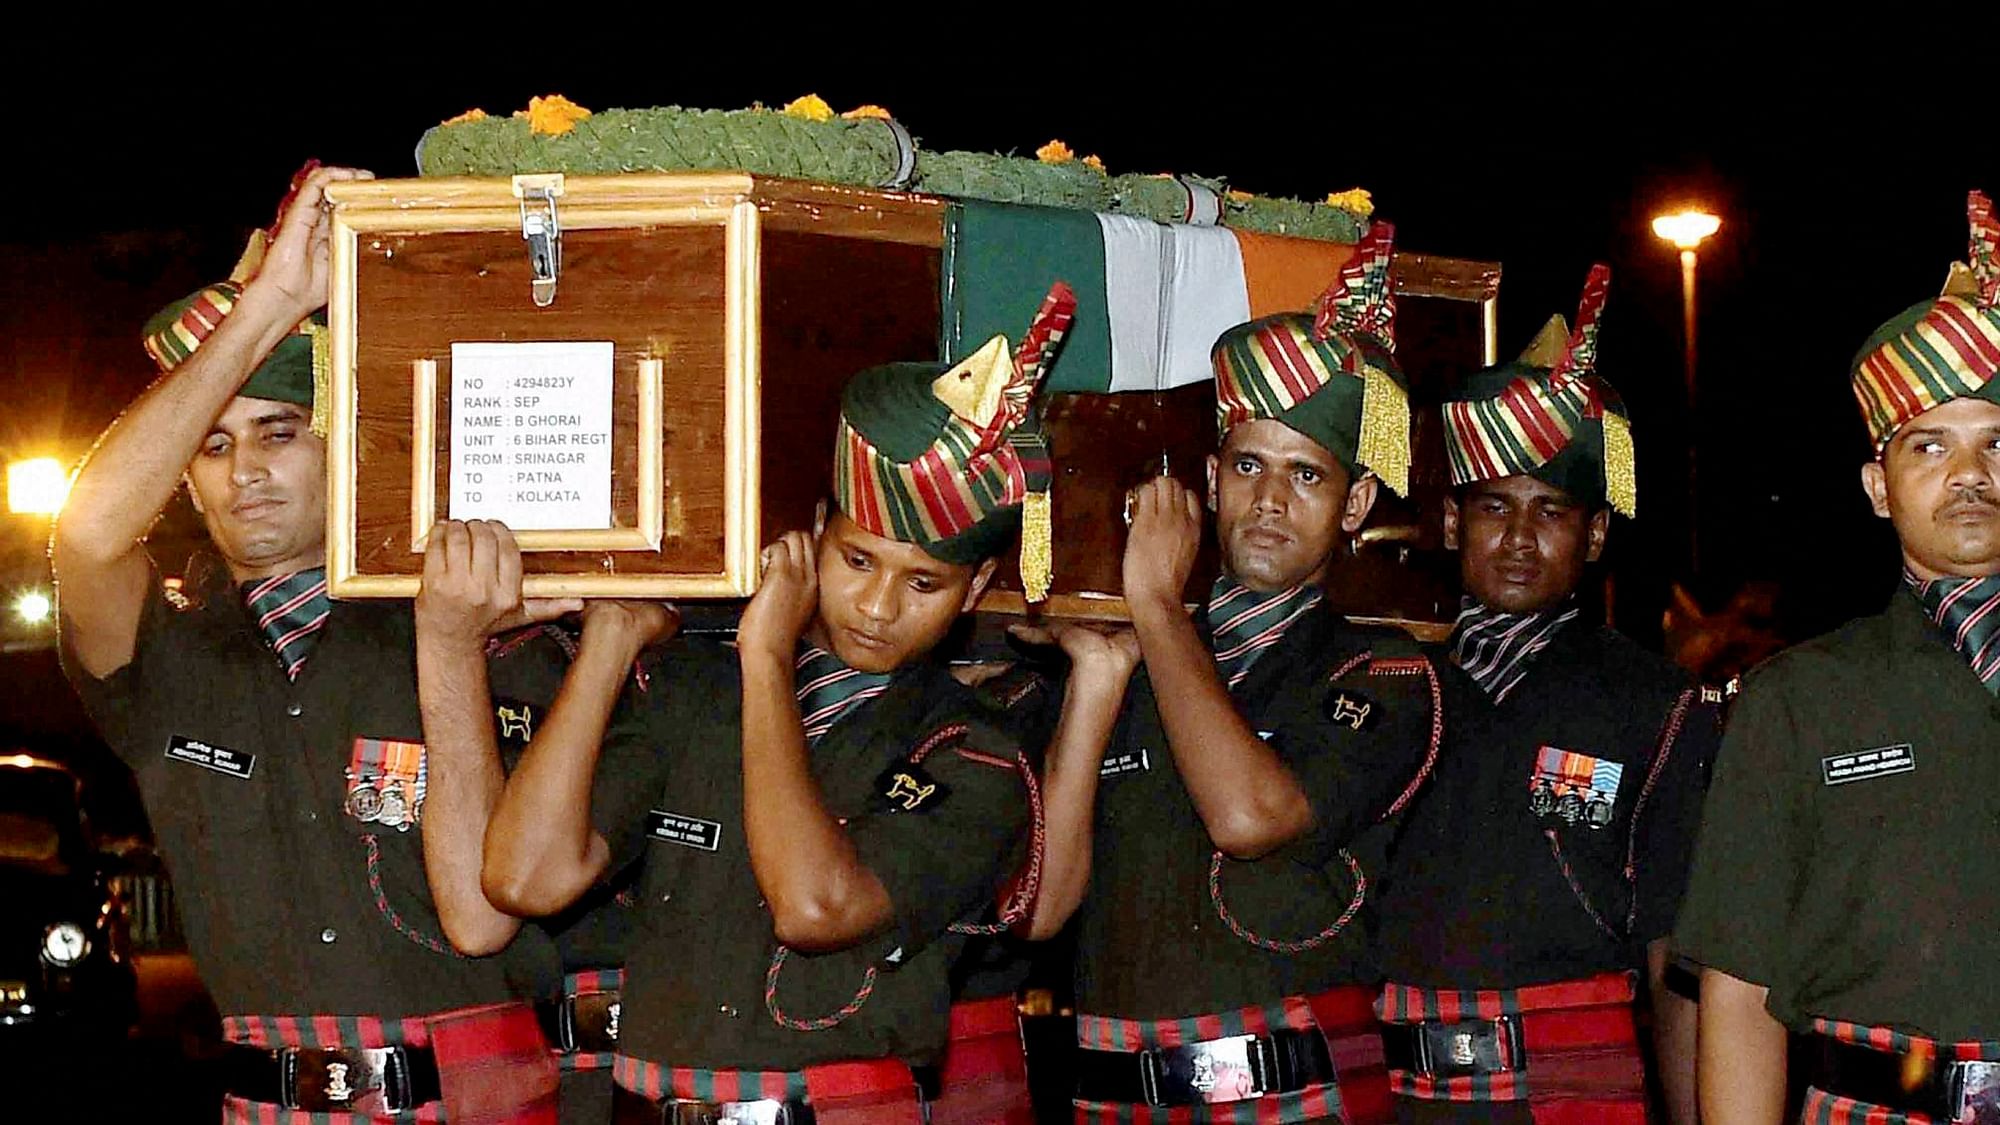 Army jawans carry the body of a martyr killed in the Uri attacks. (Photo: PTI)